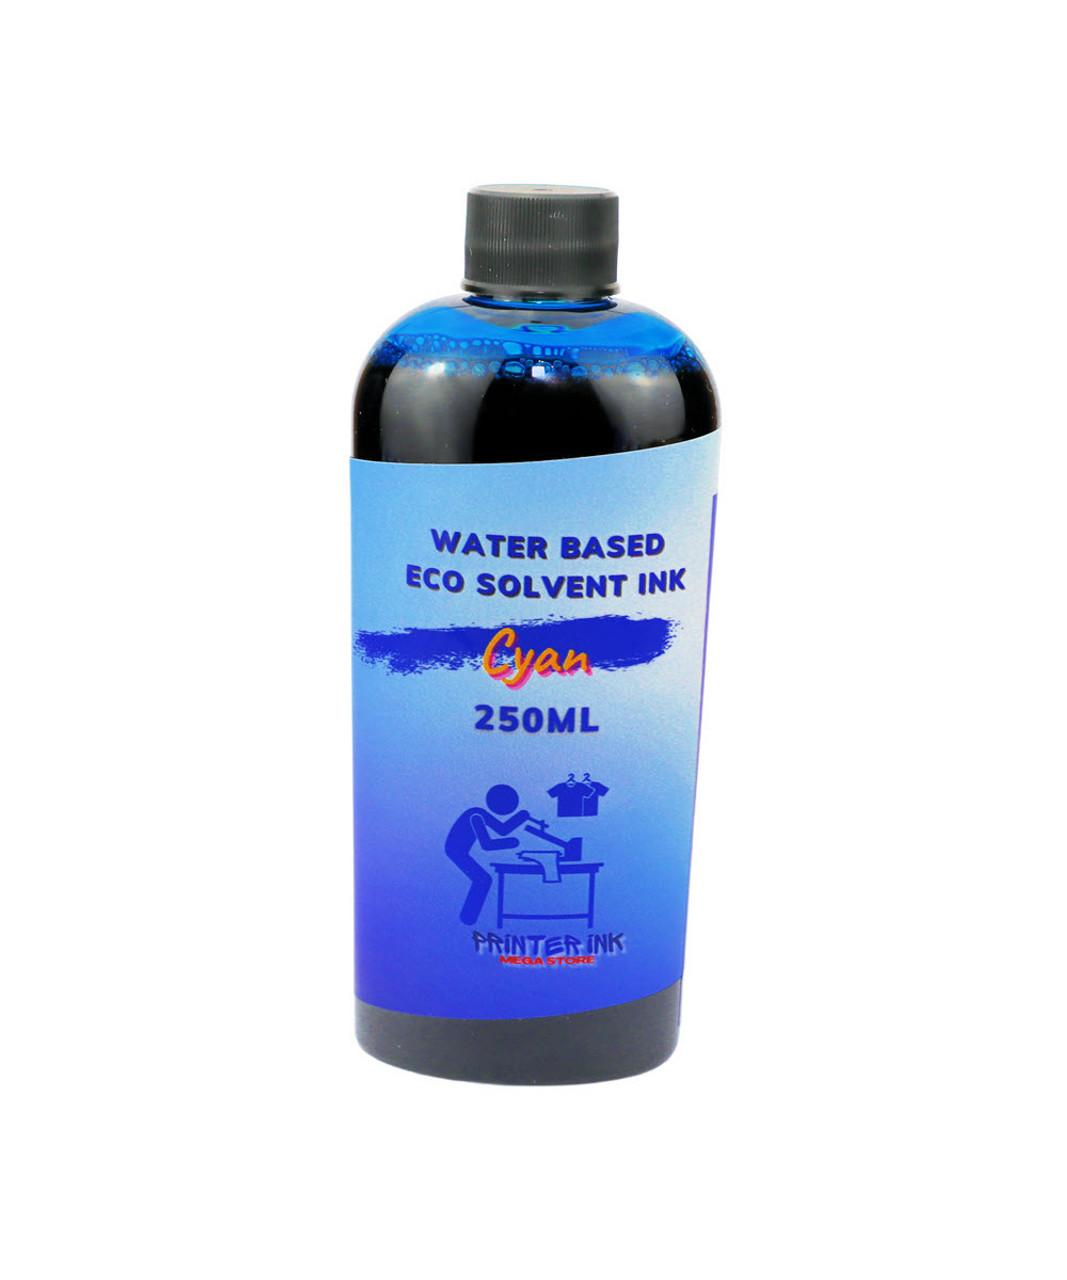 Cyan Water Based Eco Solvent Ink 250ml bottle for Epson Stylus Pro 4000 7600 9600 Printer